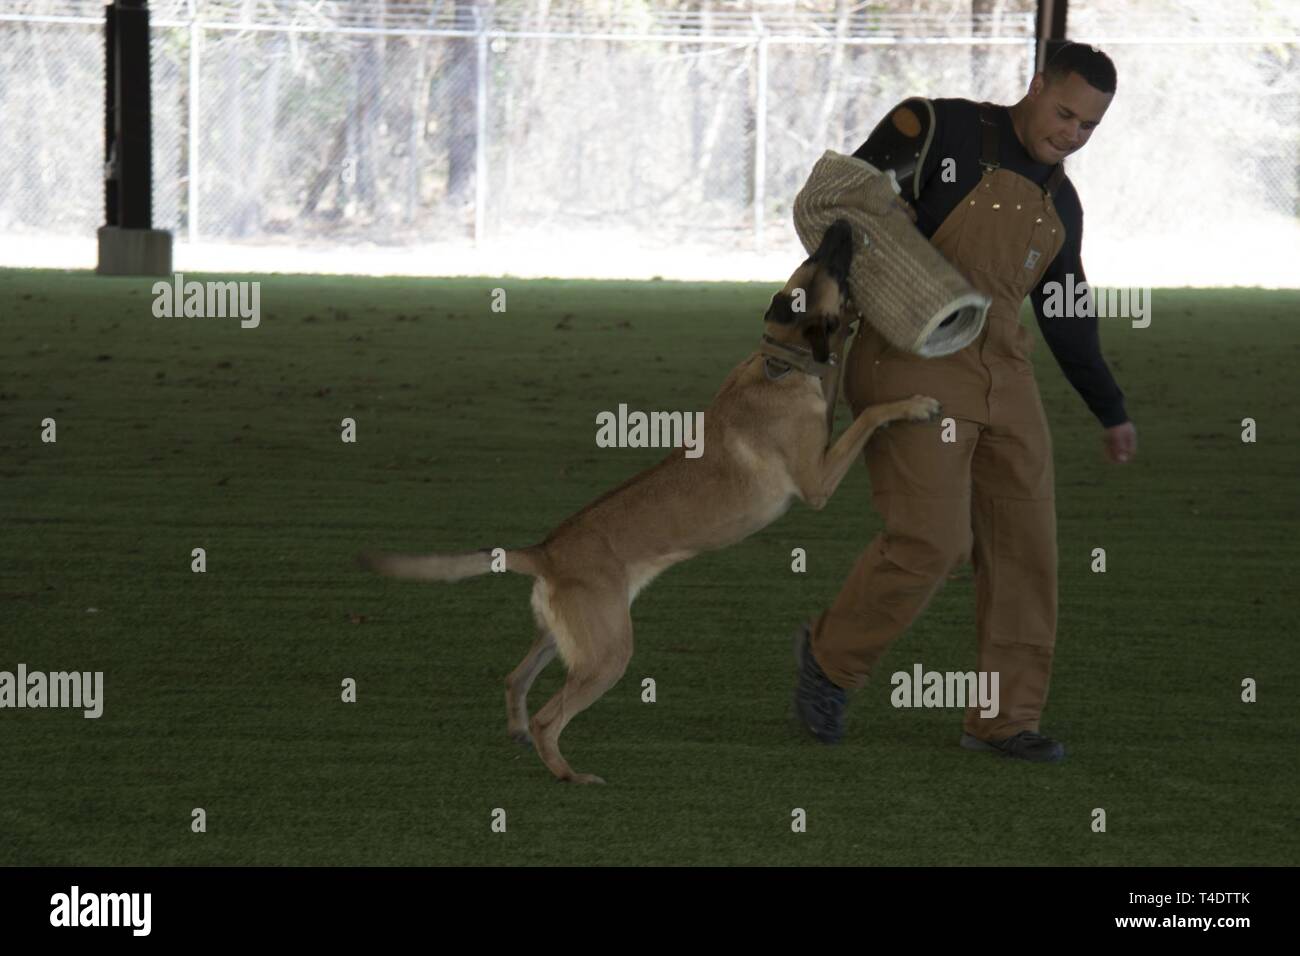 Staff Sgt. Devon Patterson, 4th Security Forces Squadron military working dog handler trains with Tessa, 4th SFS MWD, March 22, 2019, at Seymour Johnson Air Force Base, North Carolina. The bite sleeve allows MWD’s to be trained without harming handlers. Stock Photo